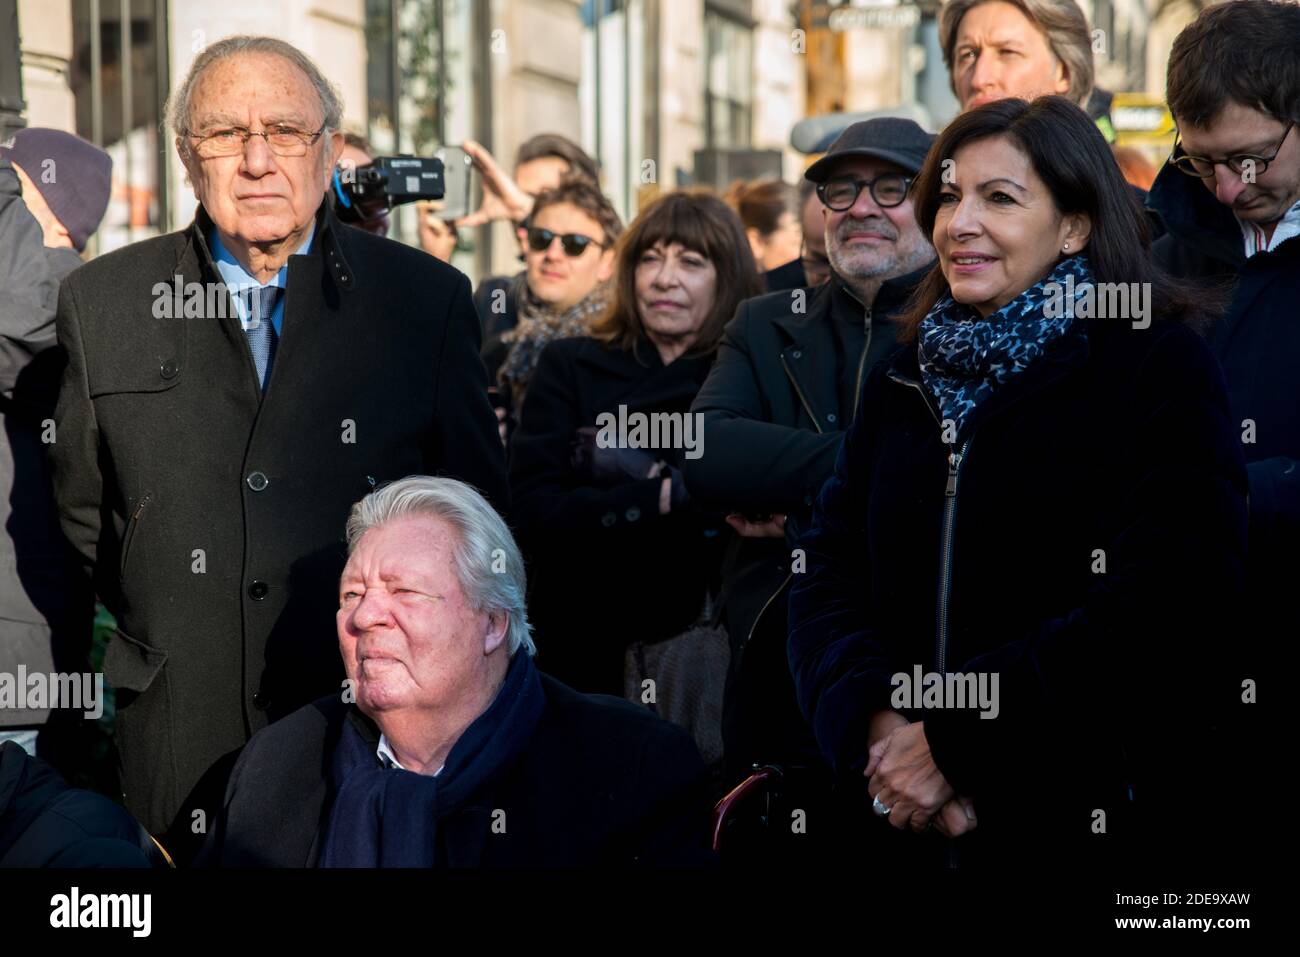 Jean-Jacques Sempe (seated) attends the unveiling of a wall fresco from one of his artwork by Mayor of Paris Anne Hidalgo (R), at the crossing of Boulevard des Filles du Calvaire and Rue Froissard, 3rd District of Paris, France, Febuary 16, 2019. Photo by Denis PrezatAvenir Pictures/ABACAPRESS.COM Stock Photo